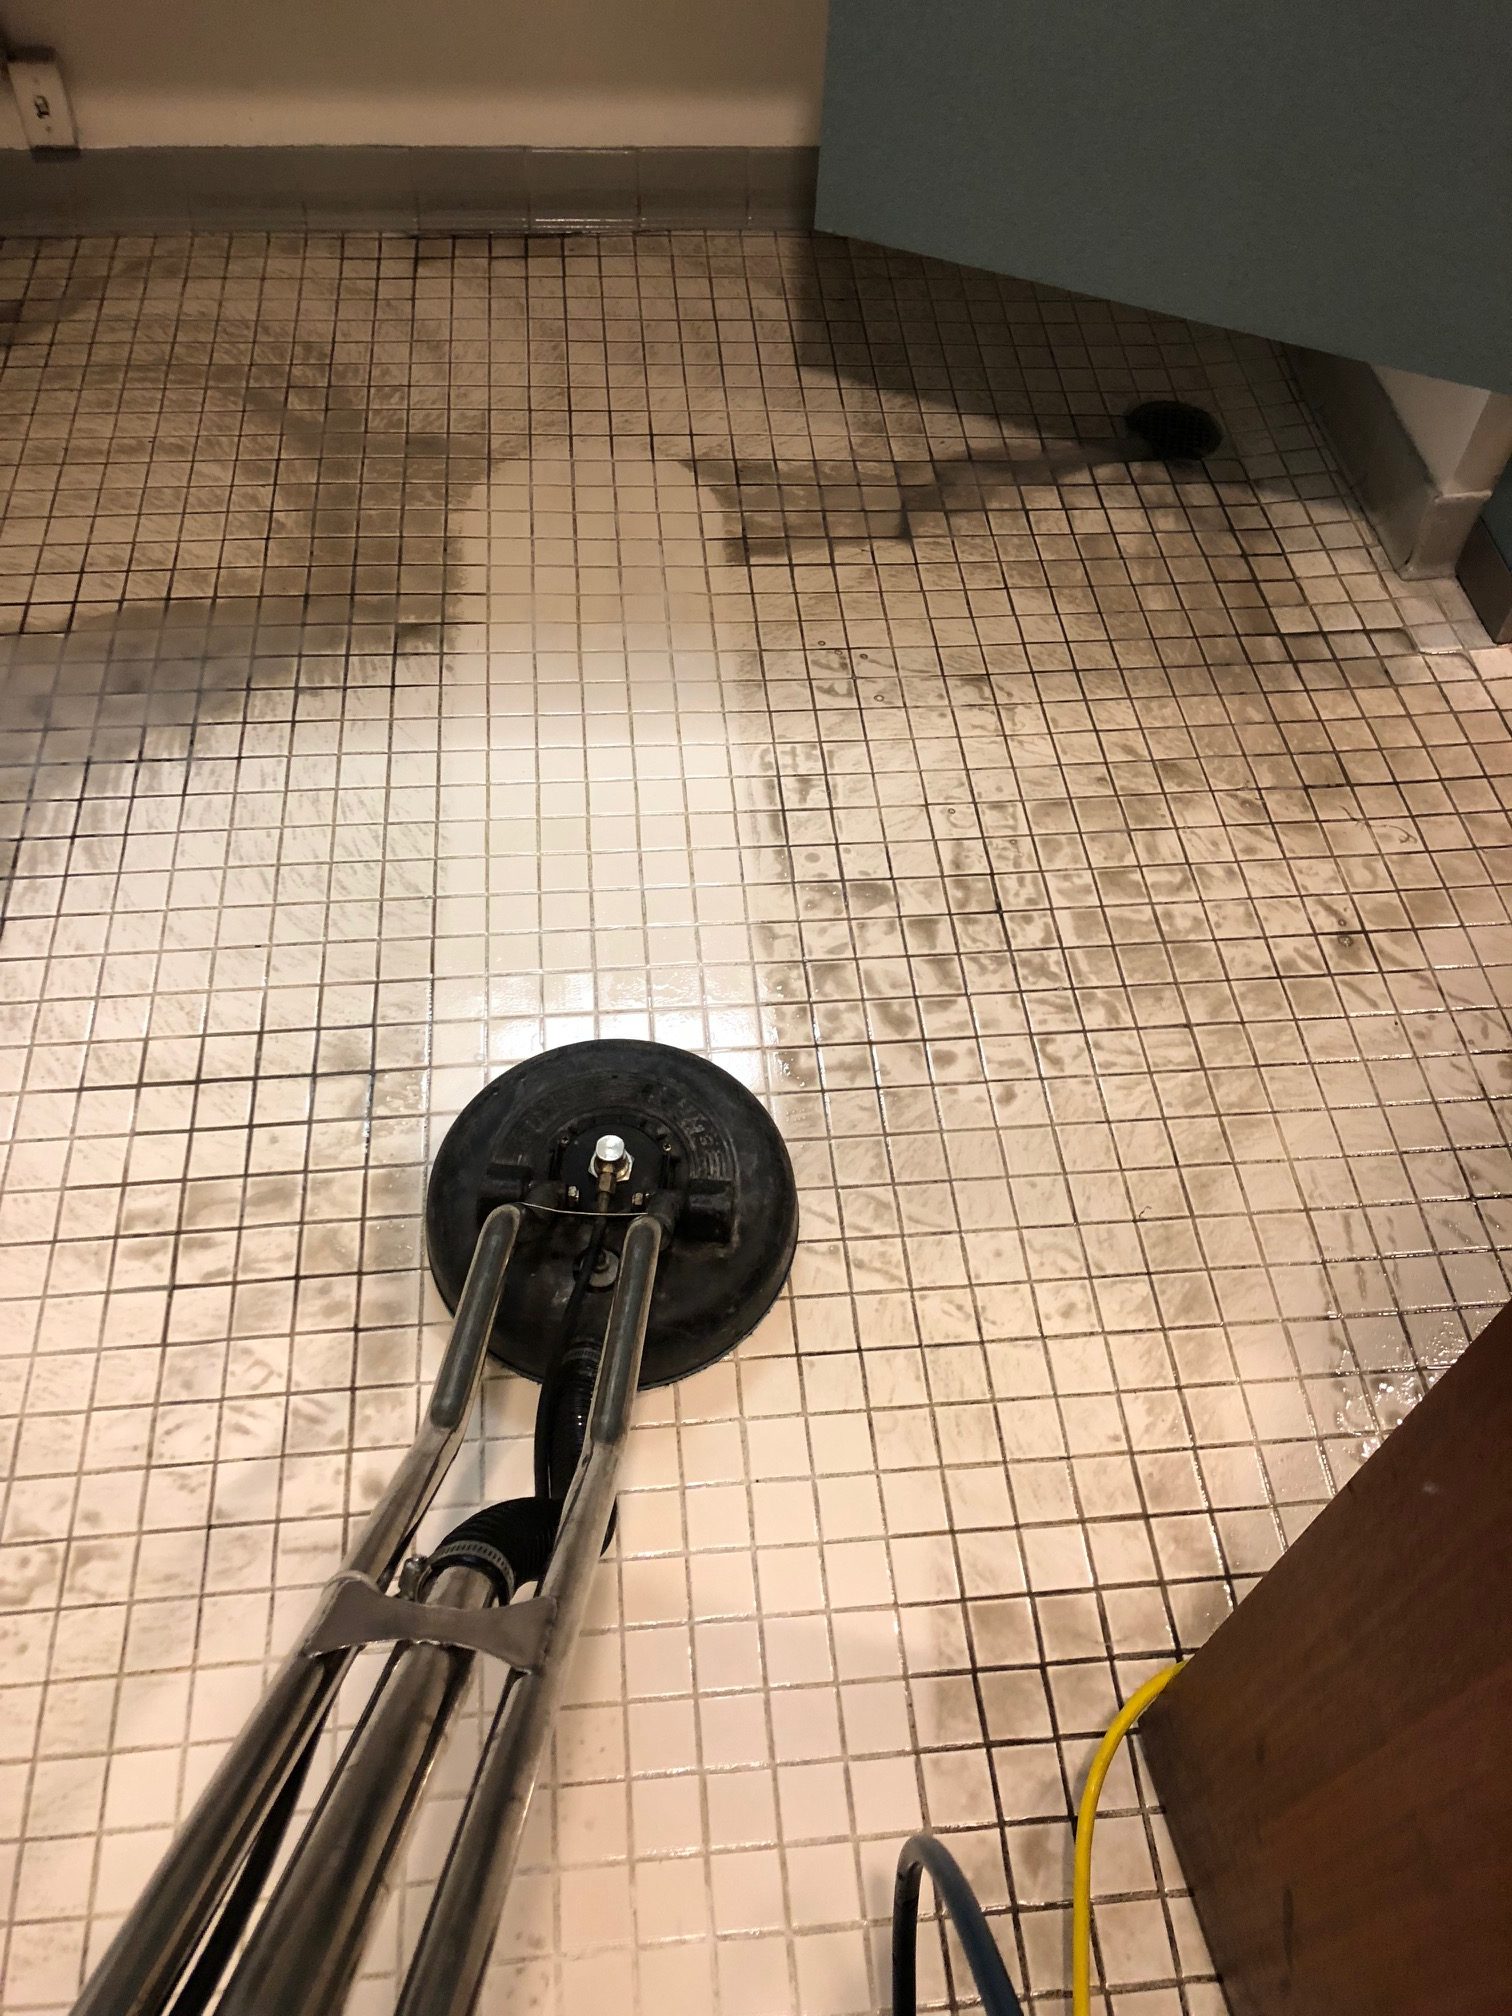  tile & grout cleaning 